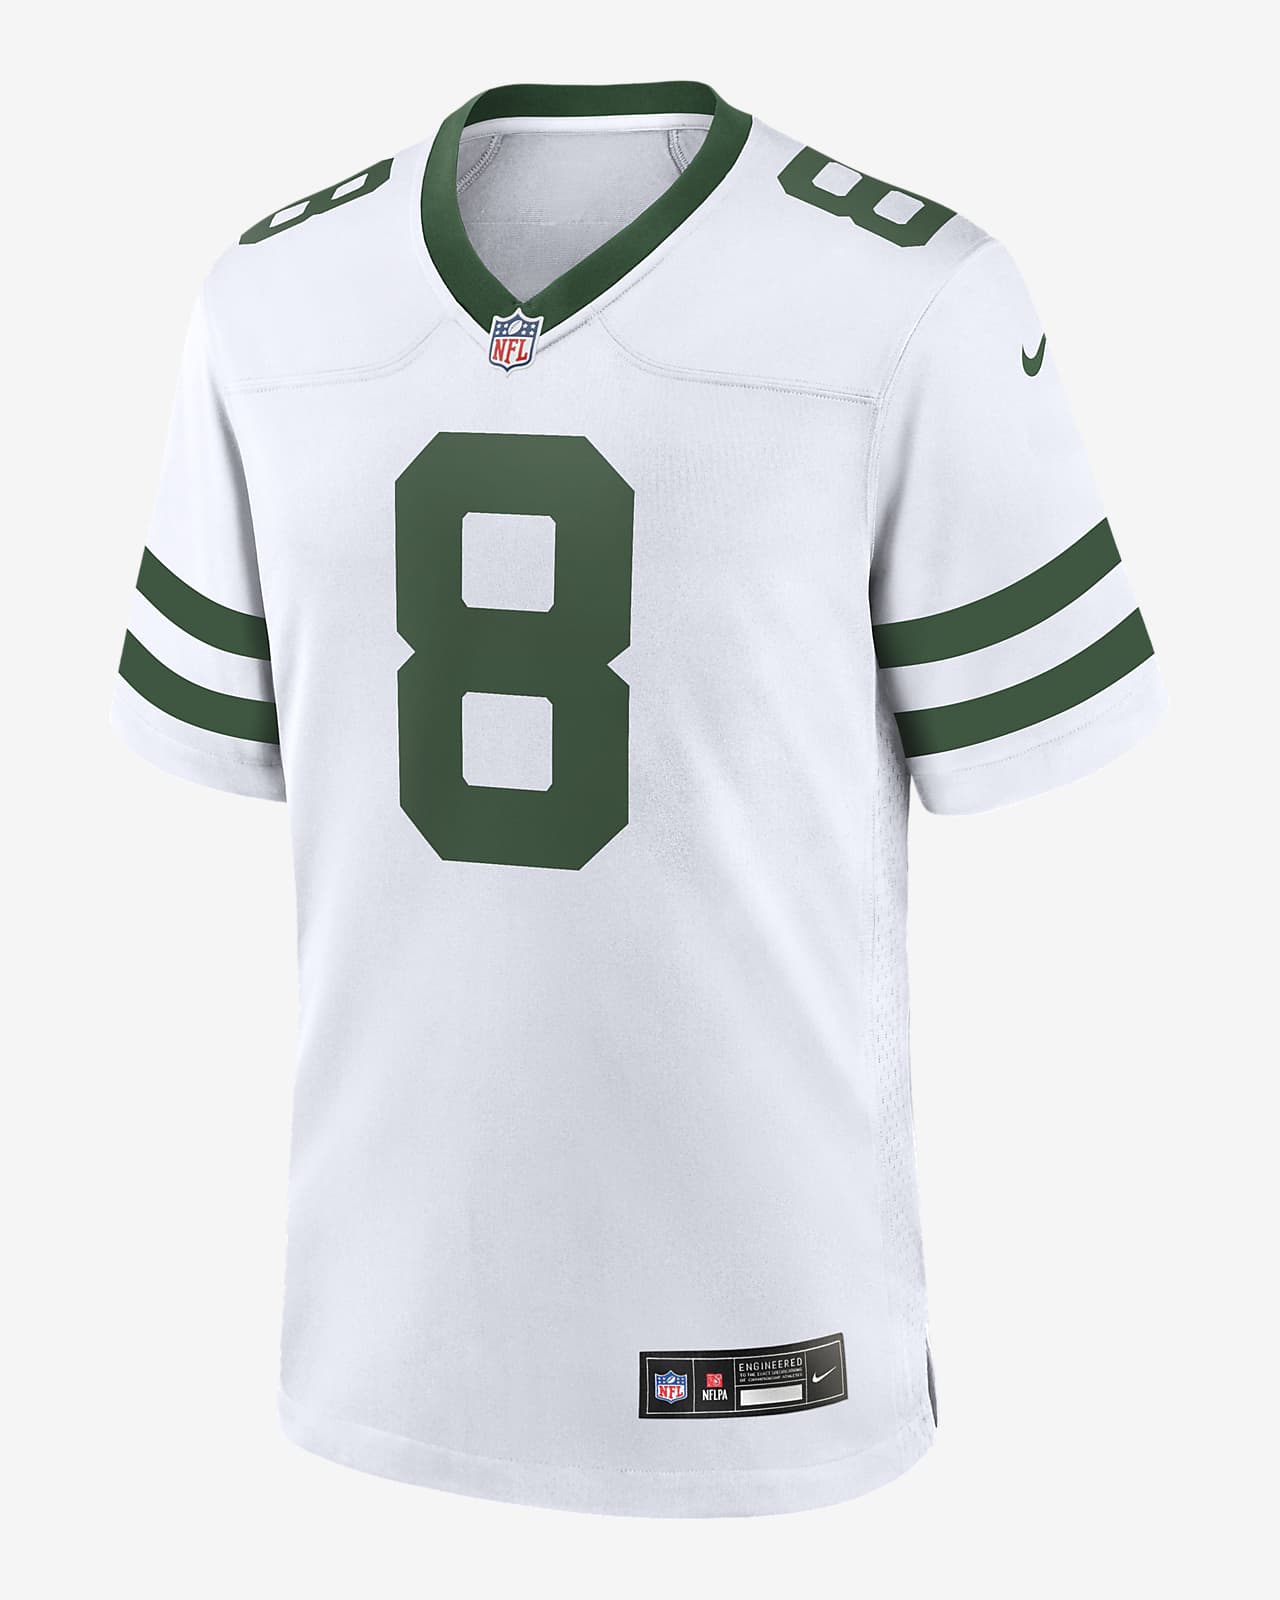 rodgers jets jersey